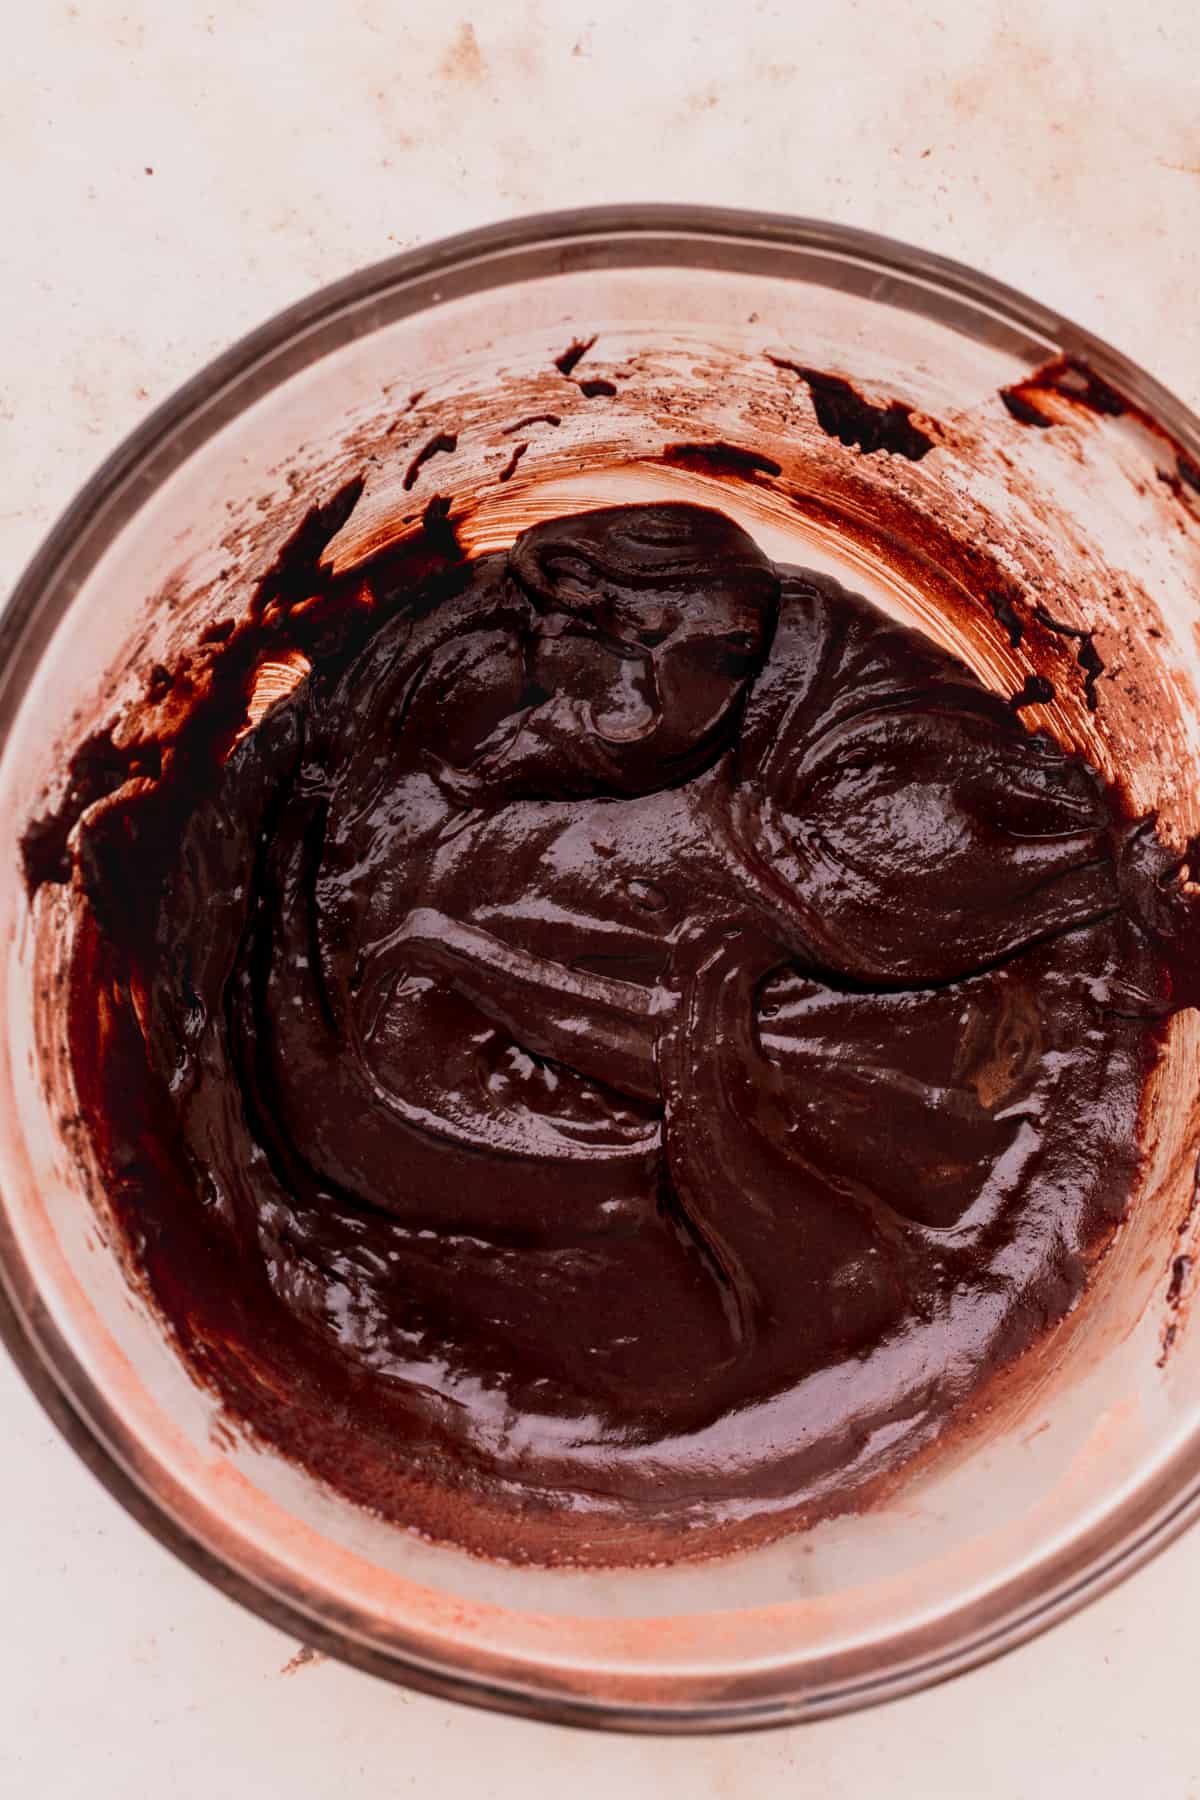 Chocolate brownie batter in a glass bowl.